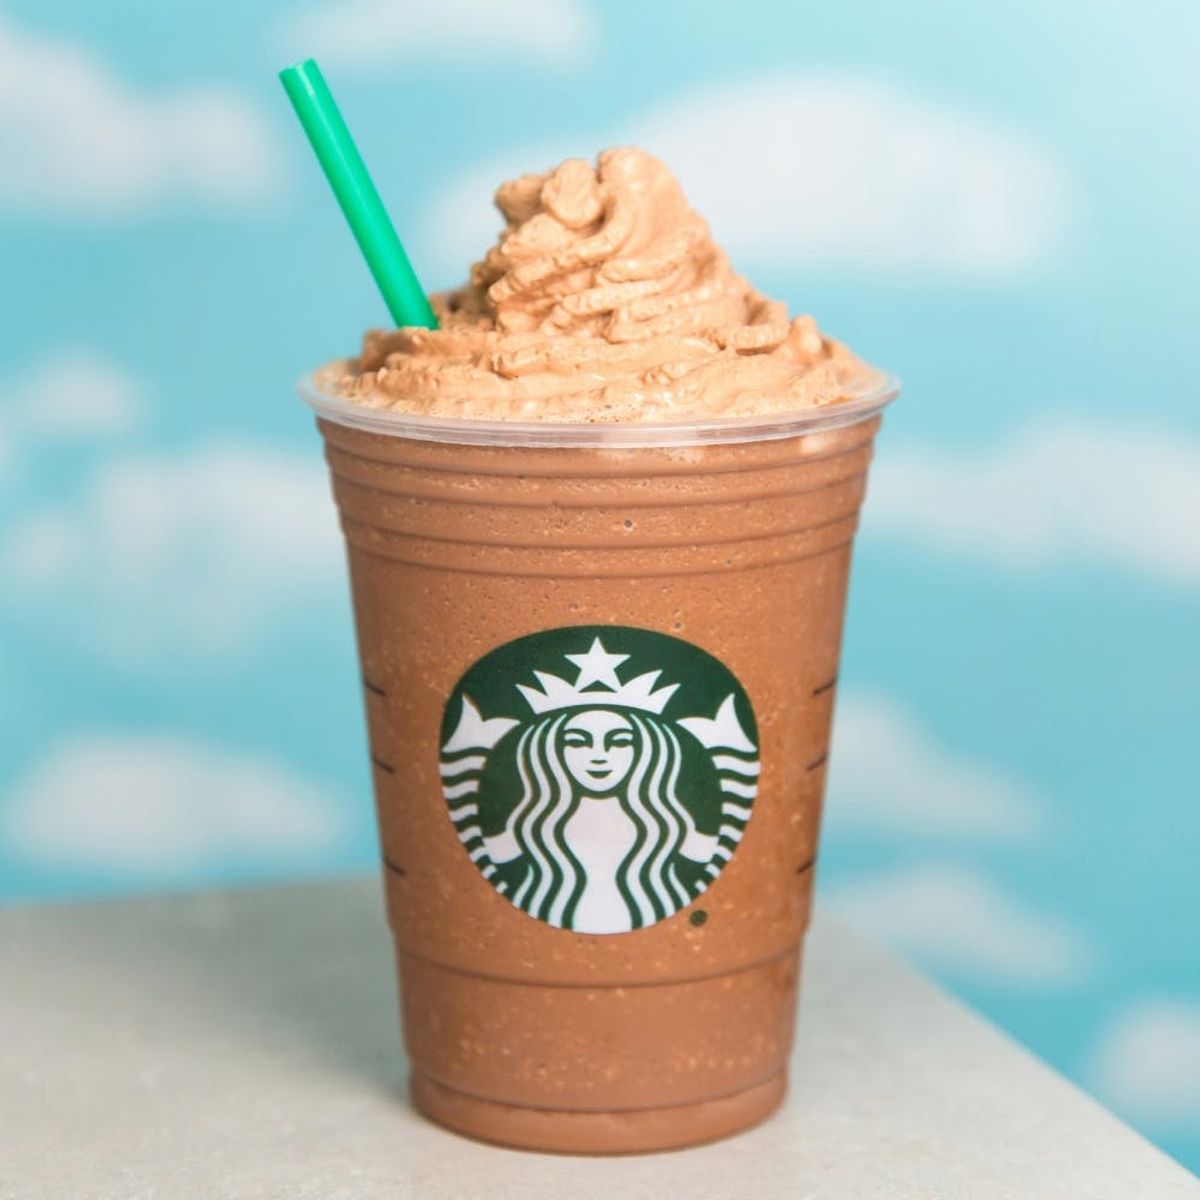 Starbucks’ New Double Double Fudge Bar Frappuccino Seems Too Good to Be True